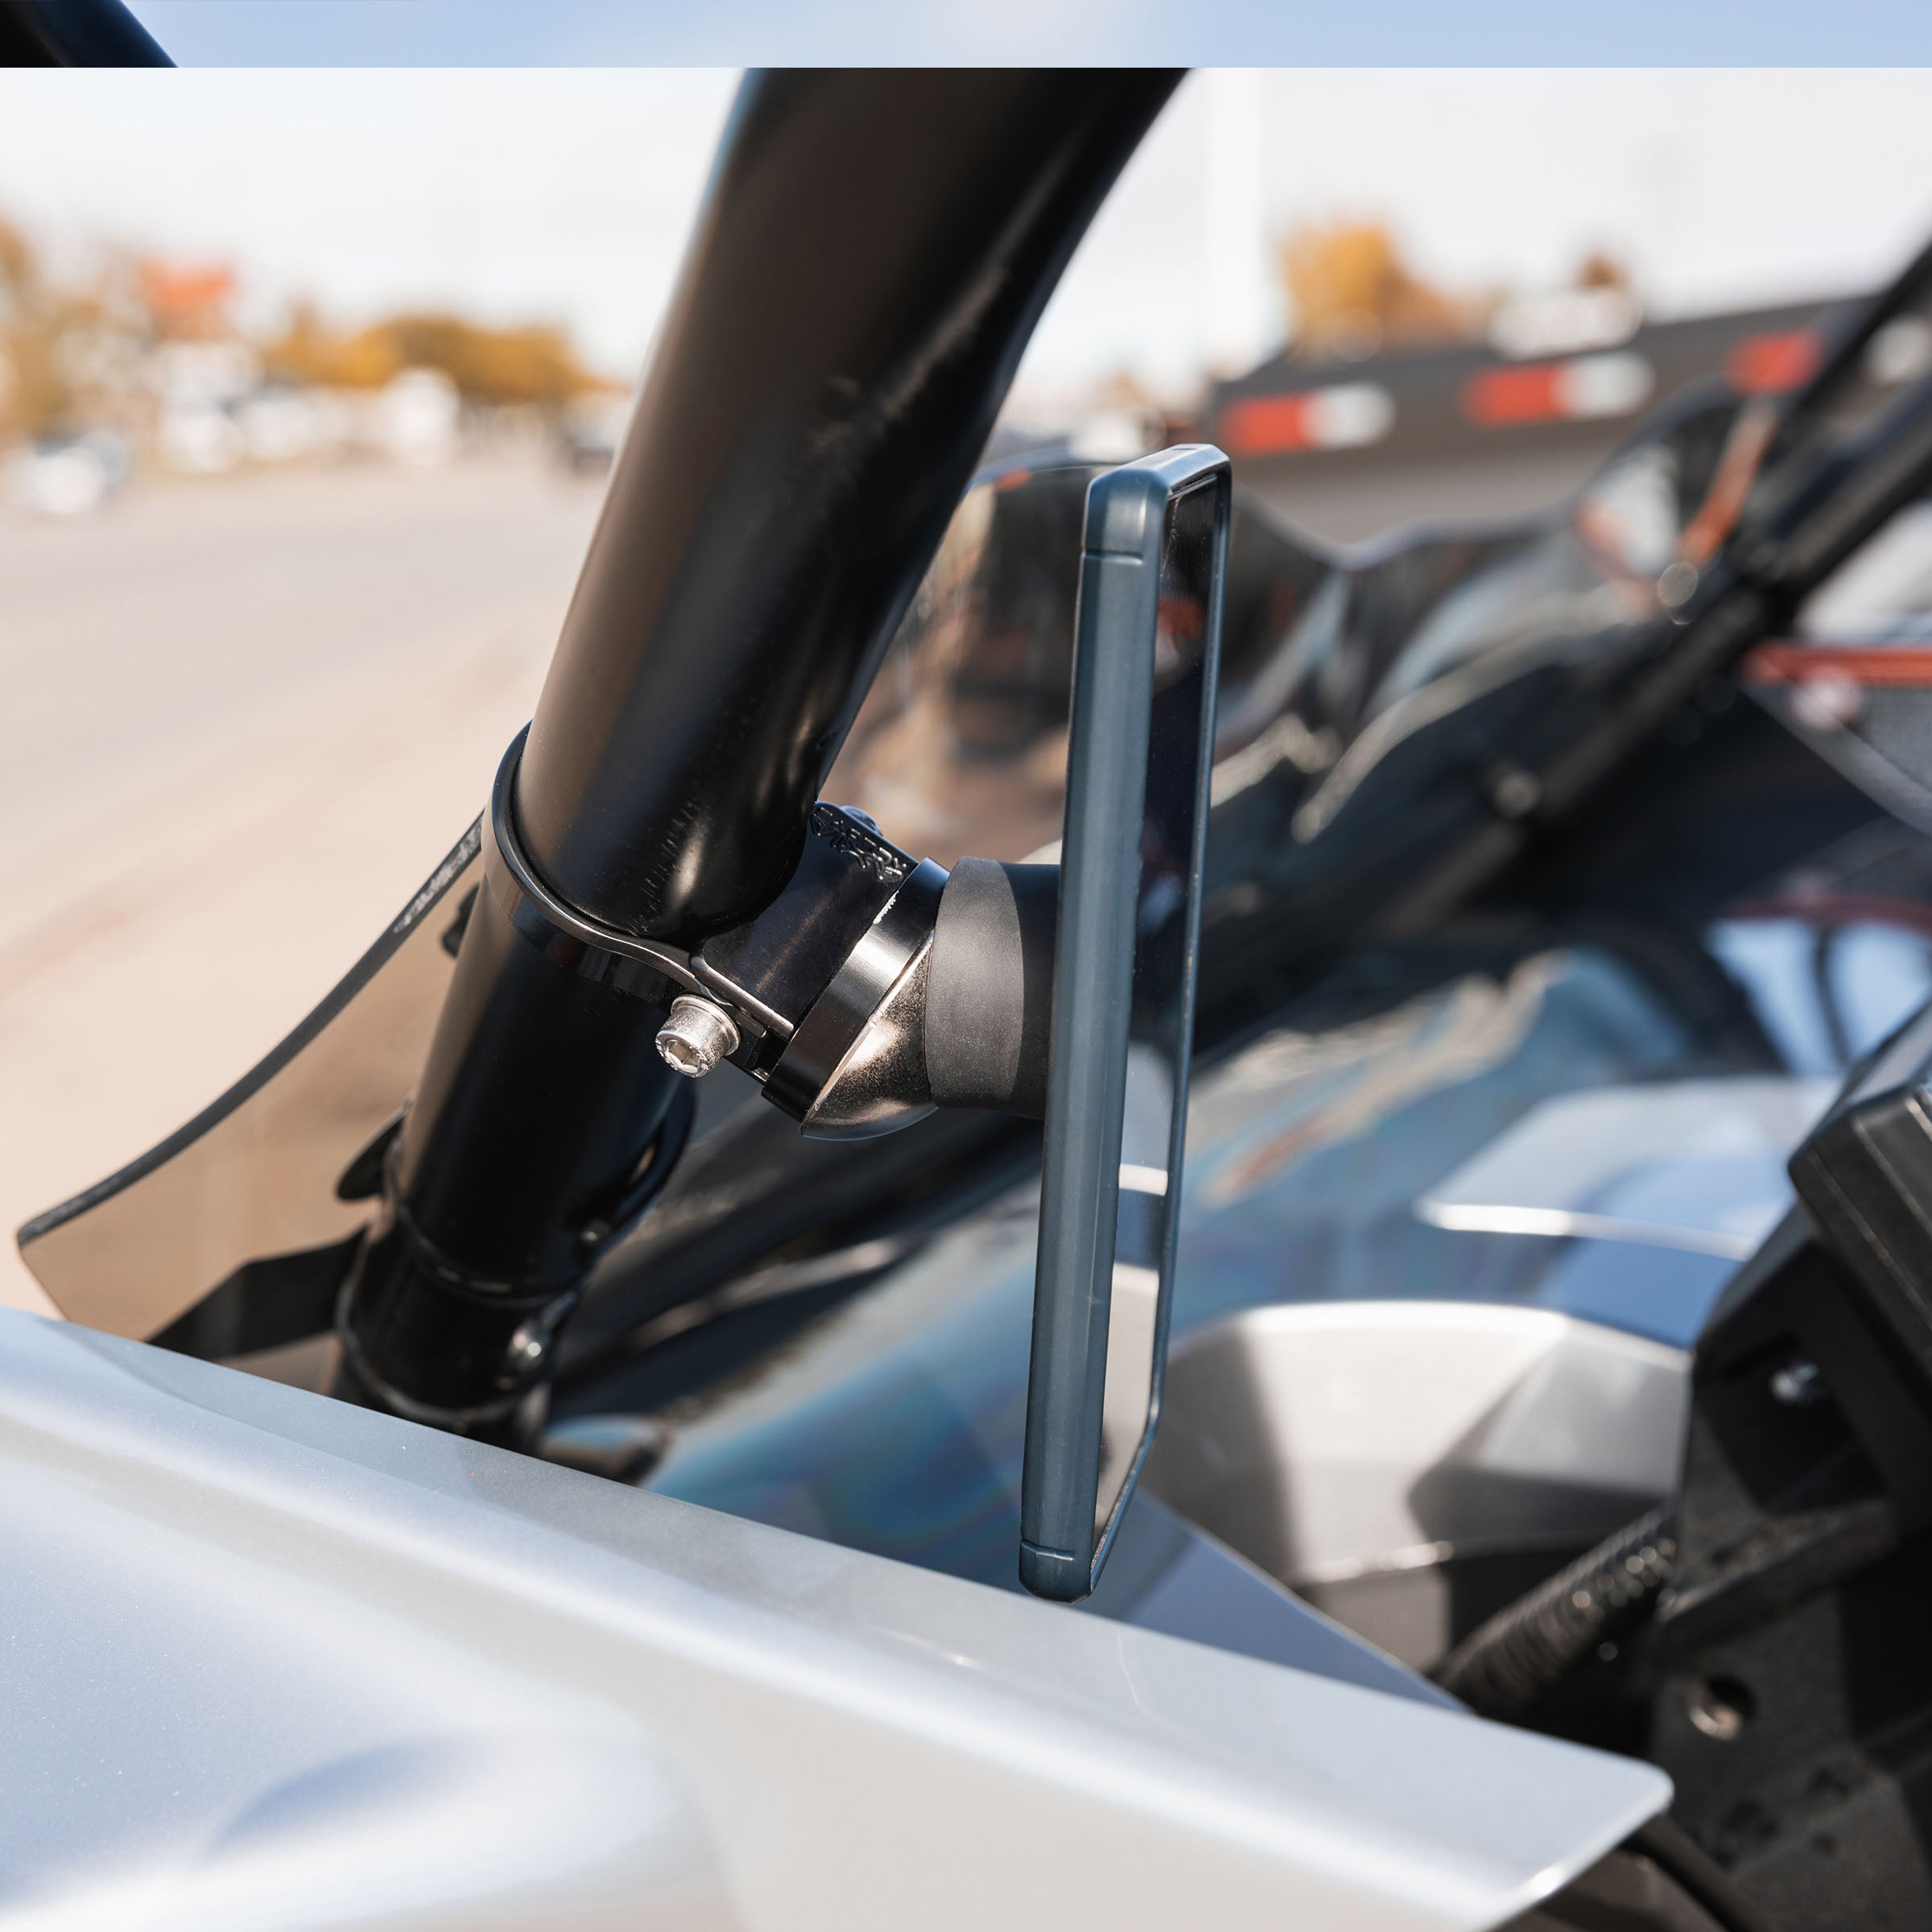 1.625 inch Roll Cage Magnetic Phone Mount in use (1.625" on CFMoto® Z950)